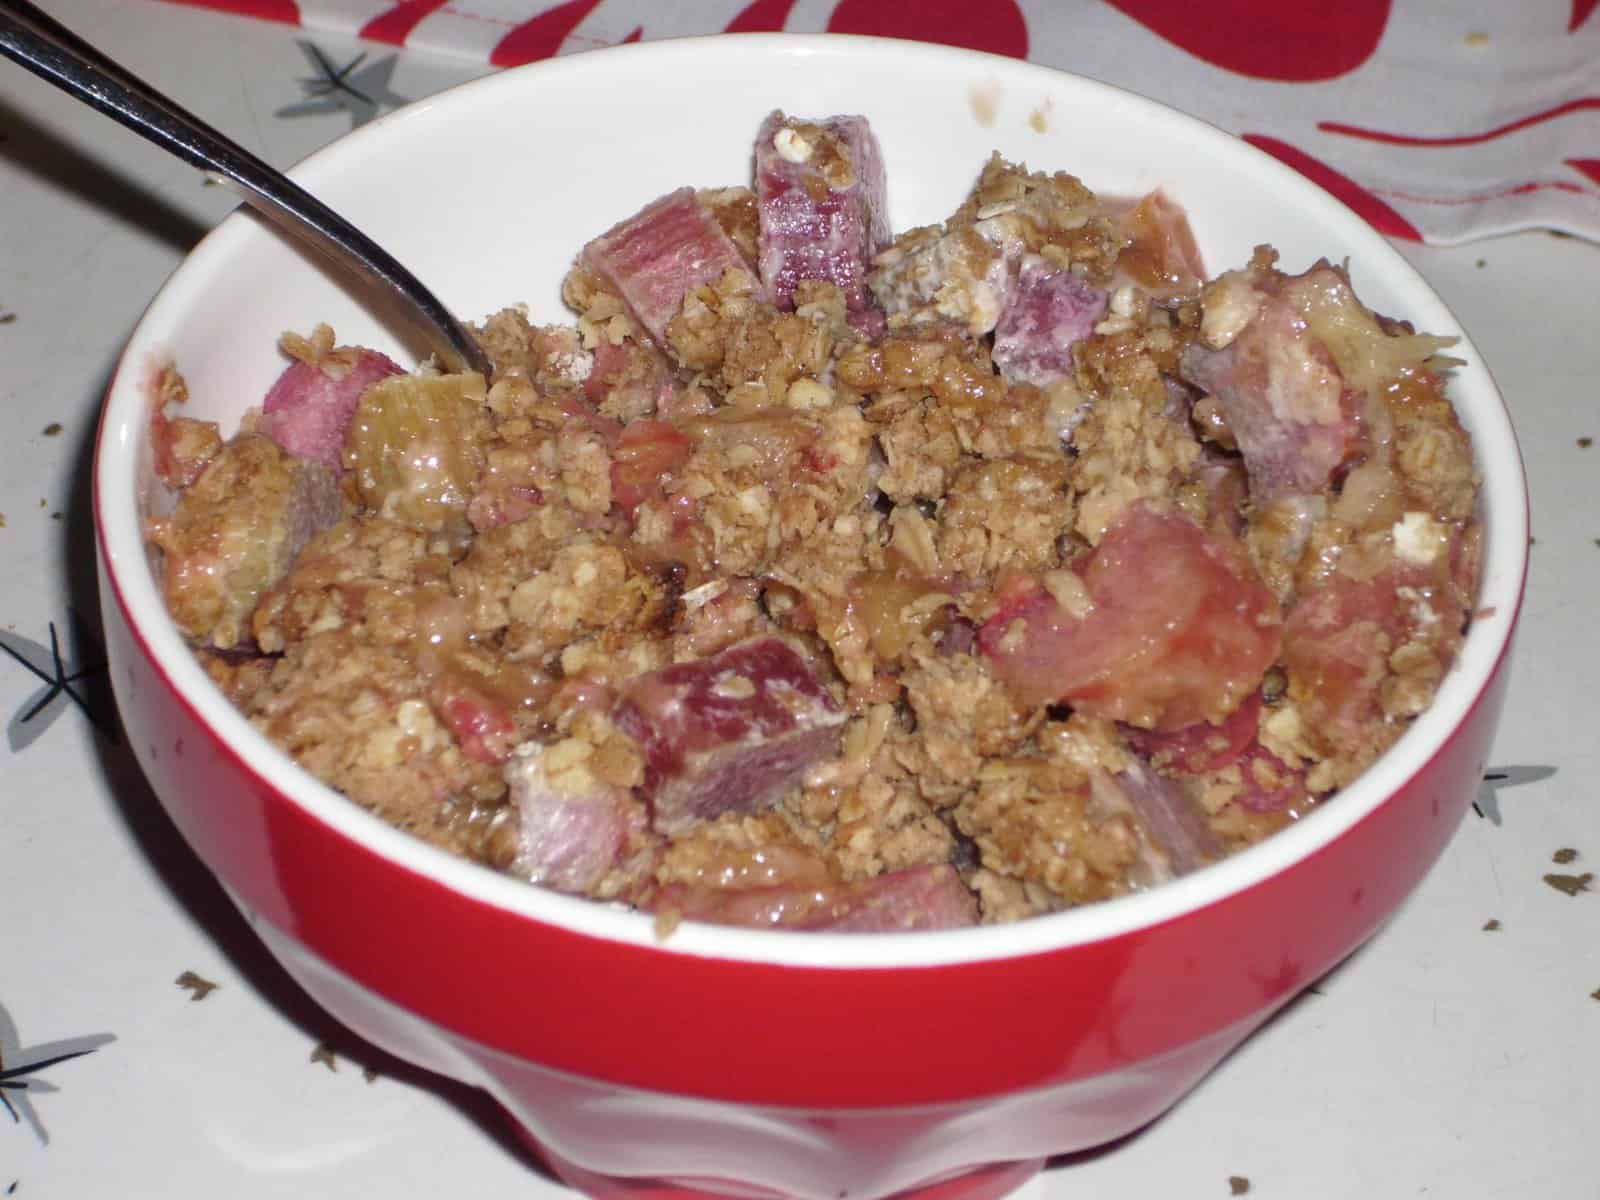  Delicious Rhubarb Crisp with a crispy and buttery crust.